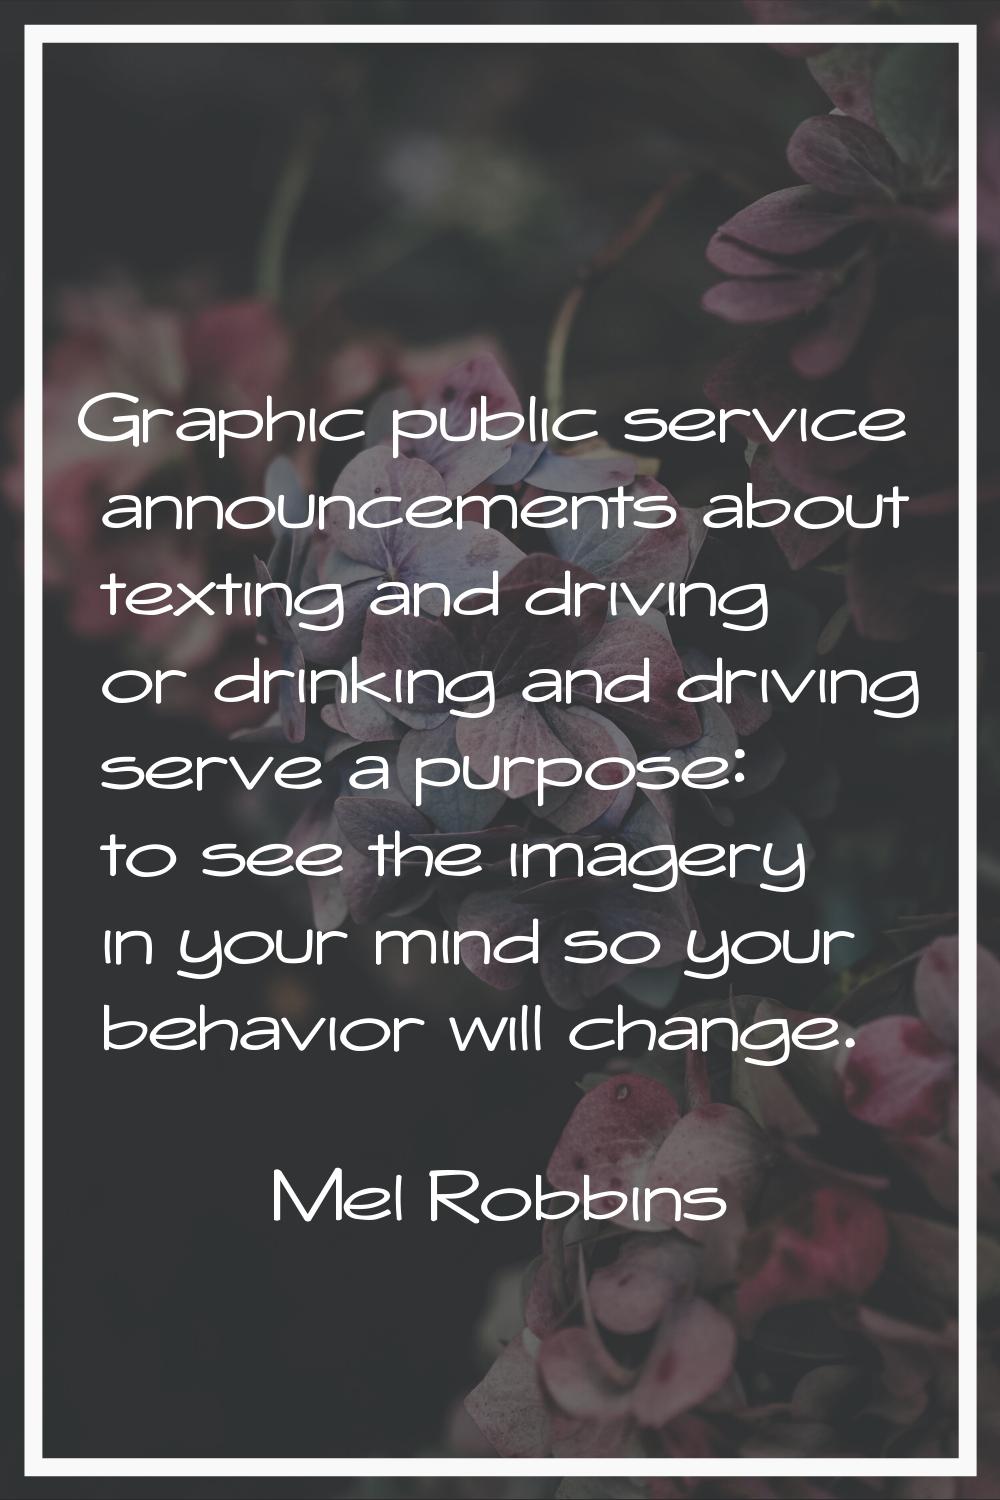 Graphic public service announcements about texting and driving or drinking and driving serve a purp